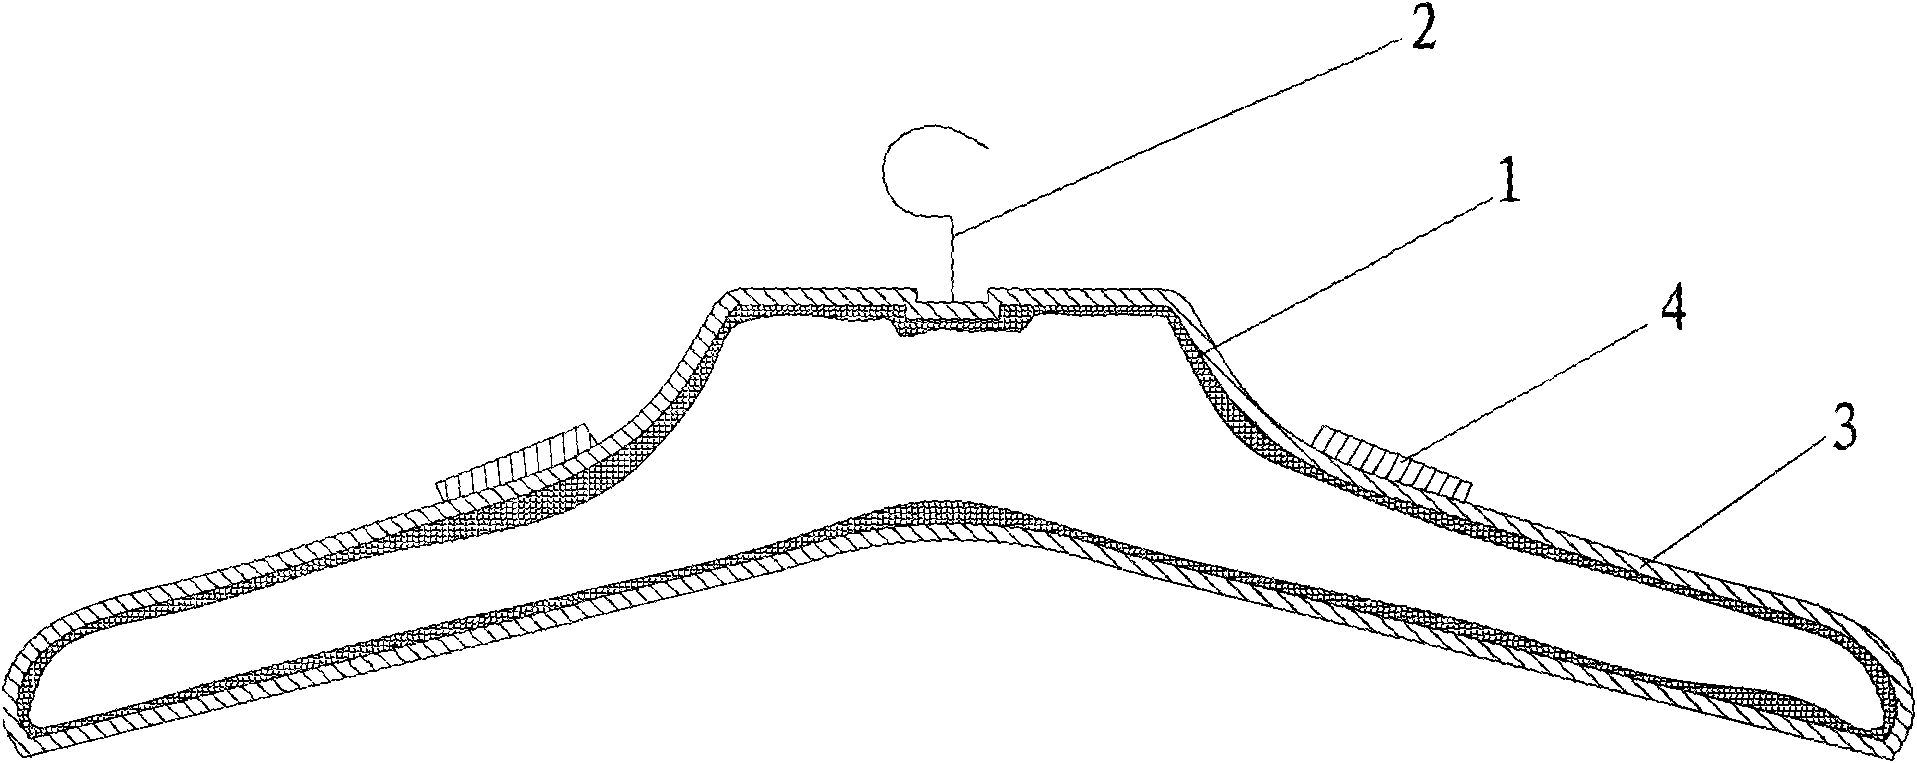 Clothes rack, mold for same and method for manufacturing same